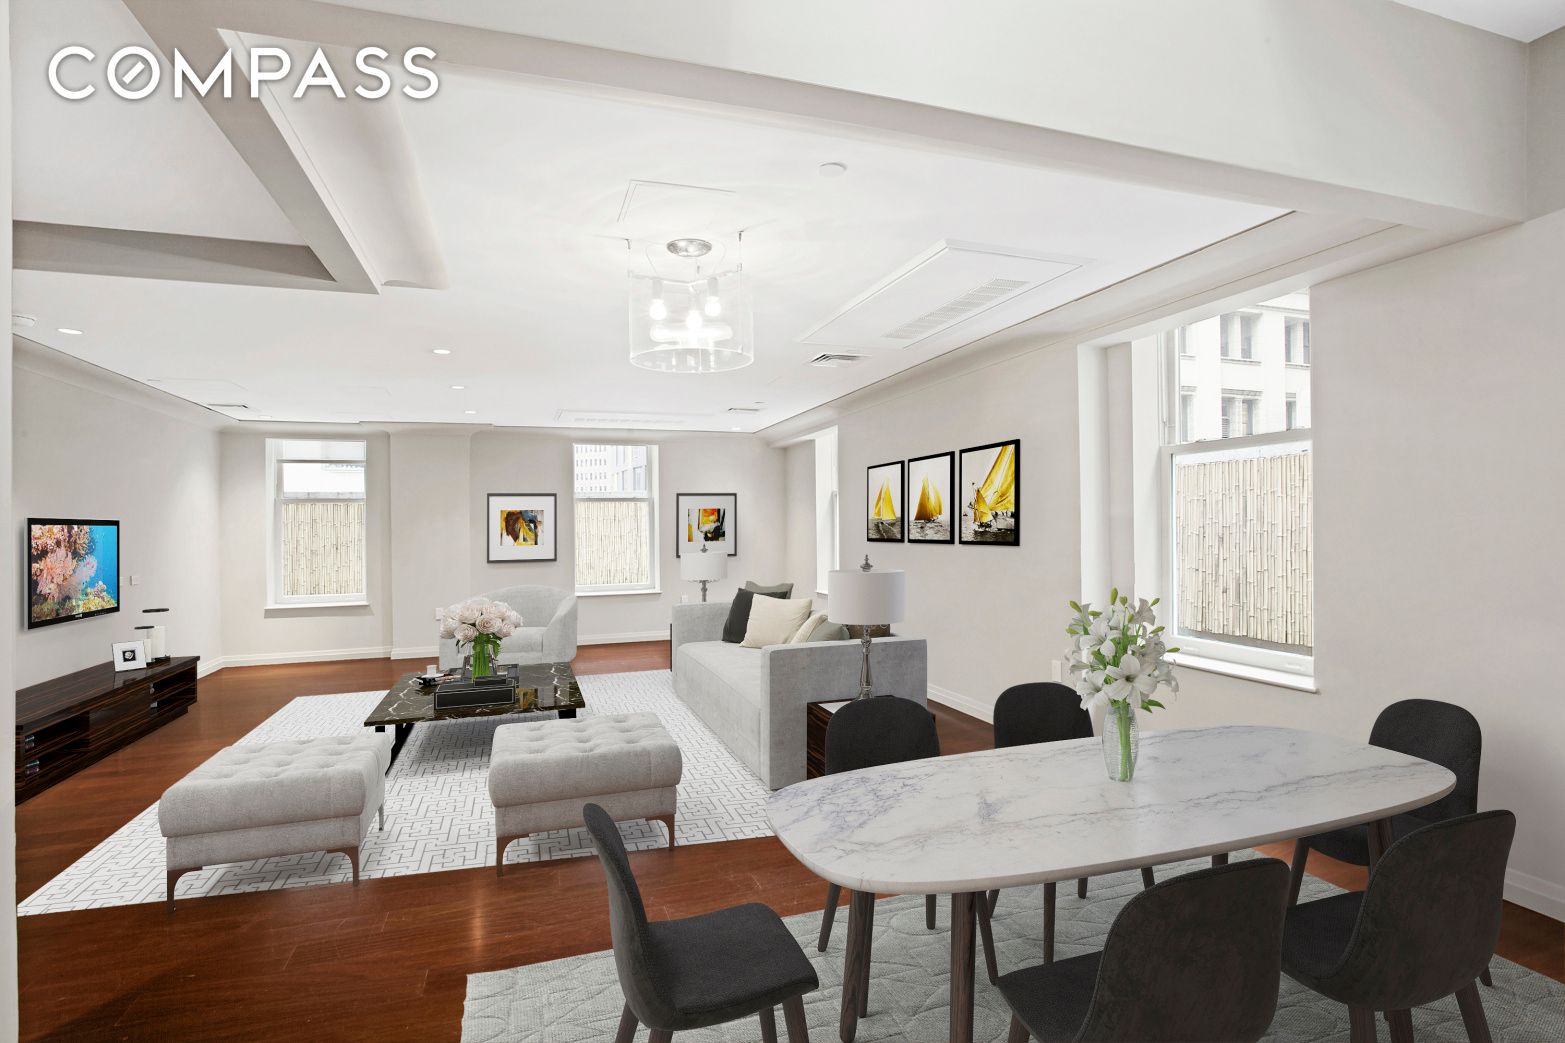 55 Wall Street Ph910, Financial District, Downtown, NYC - 3 Bedrooms  
2.5 Bathrooms  
5 Rooms - 